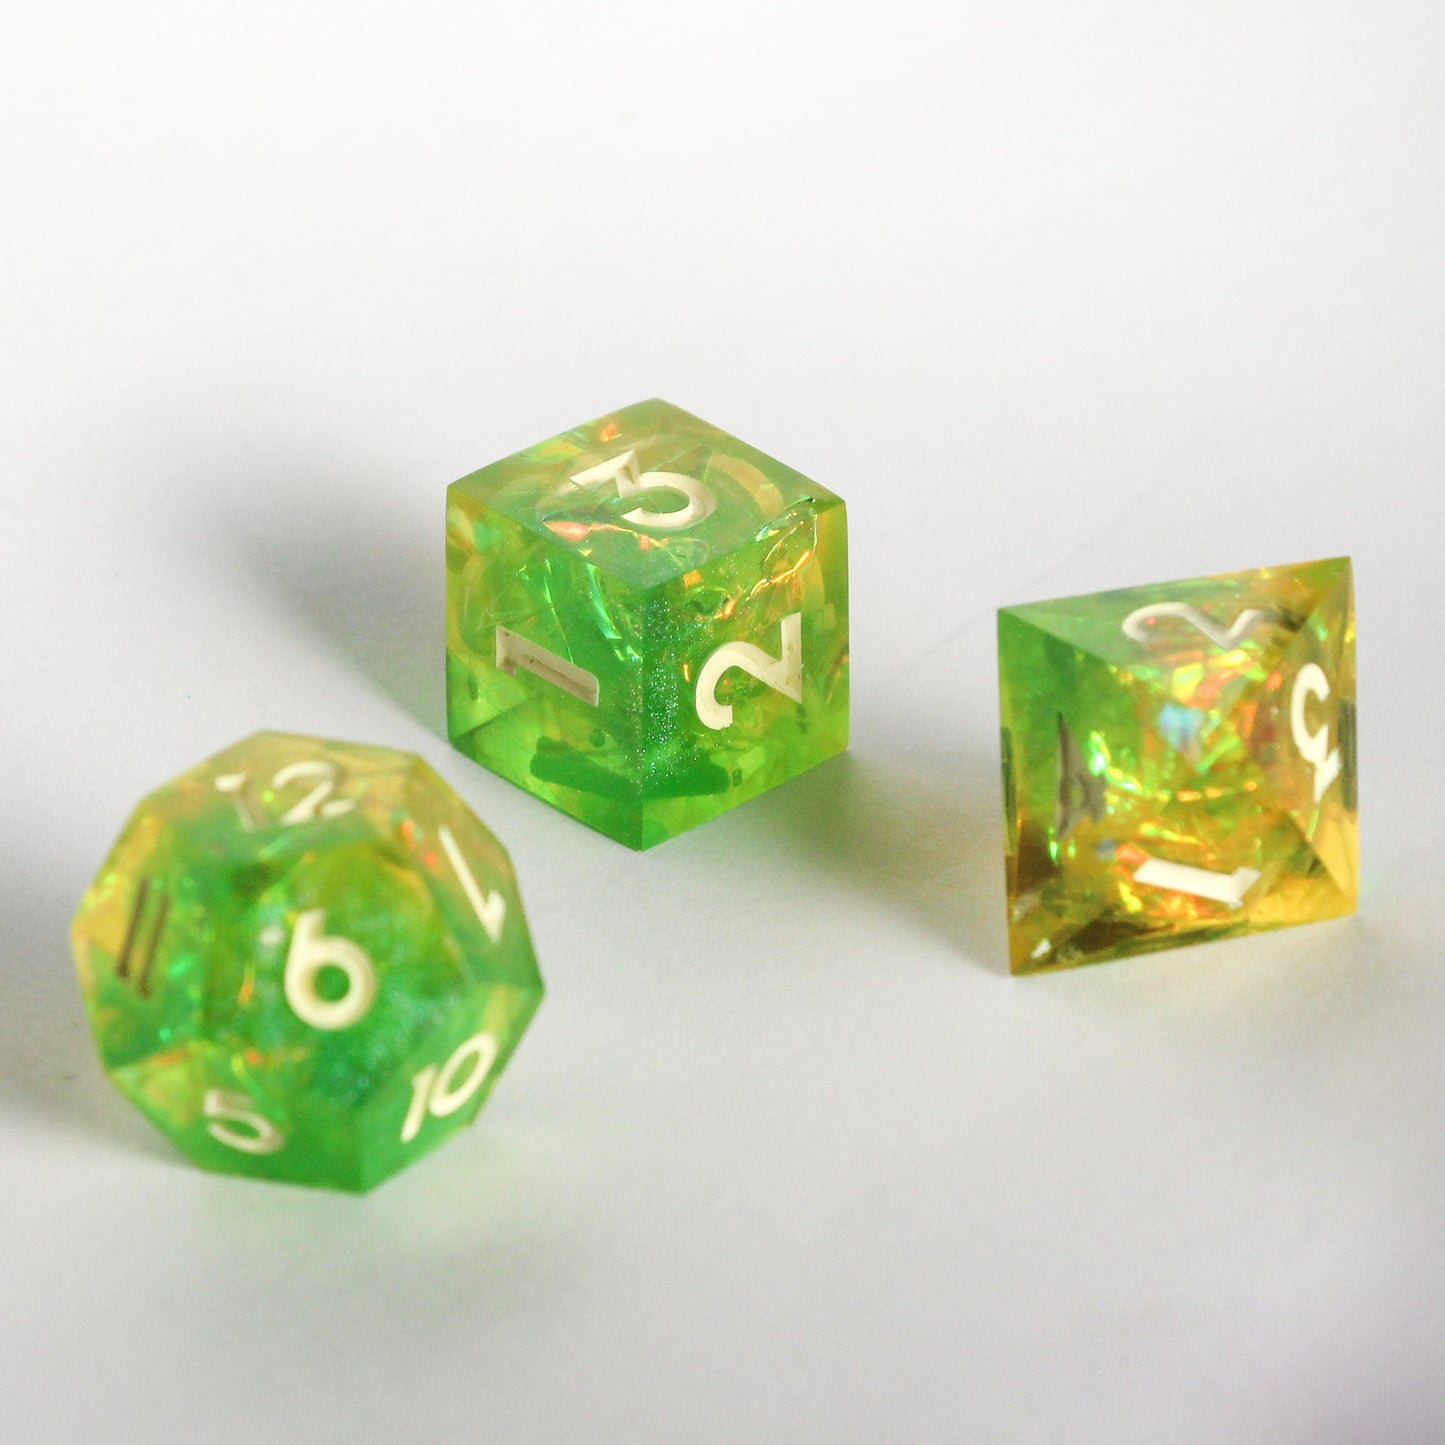 Nuclear Assault – 7-piece Polyhedral Dice Set